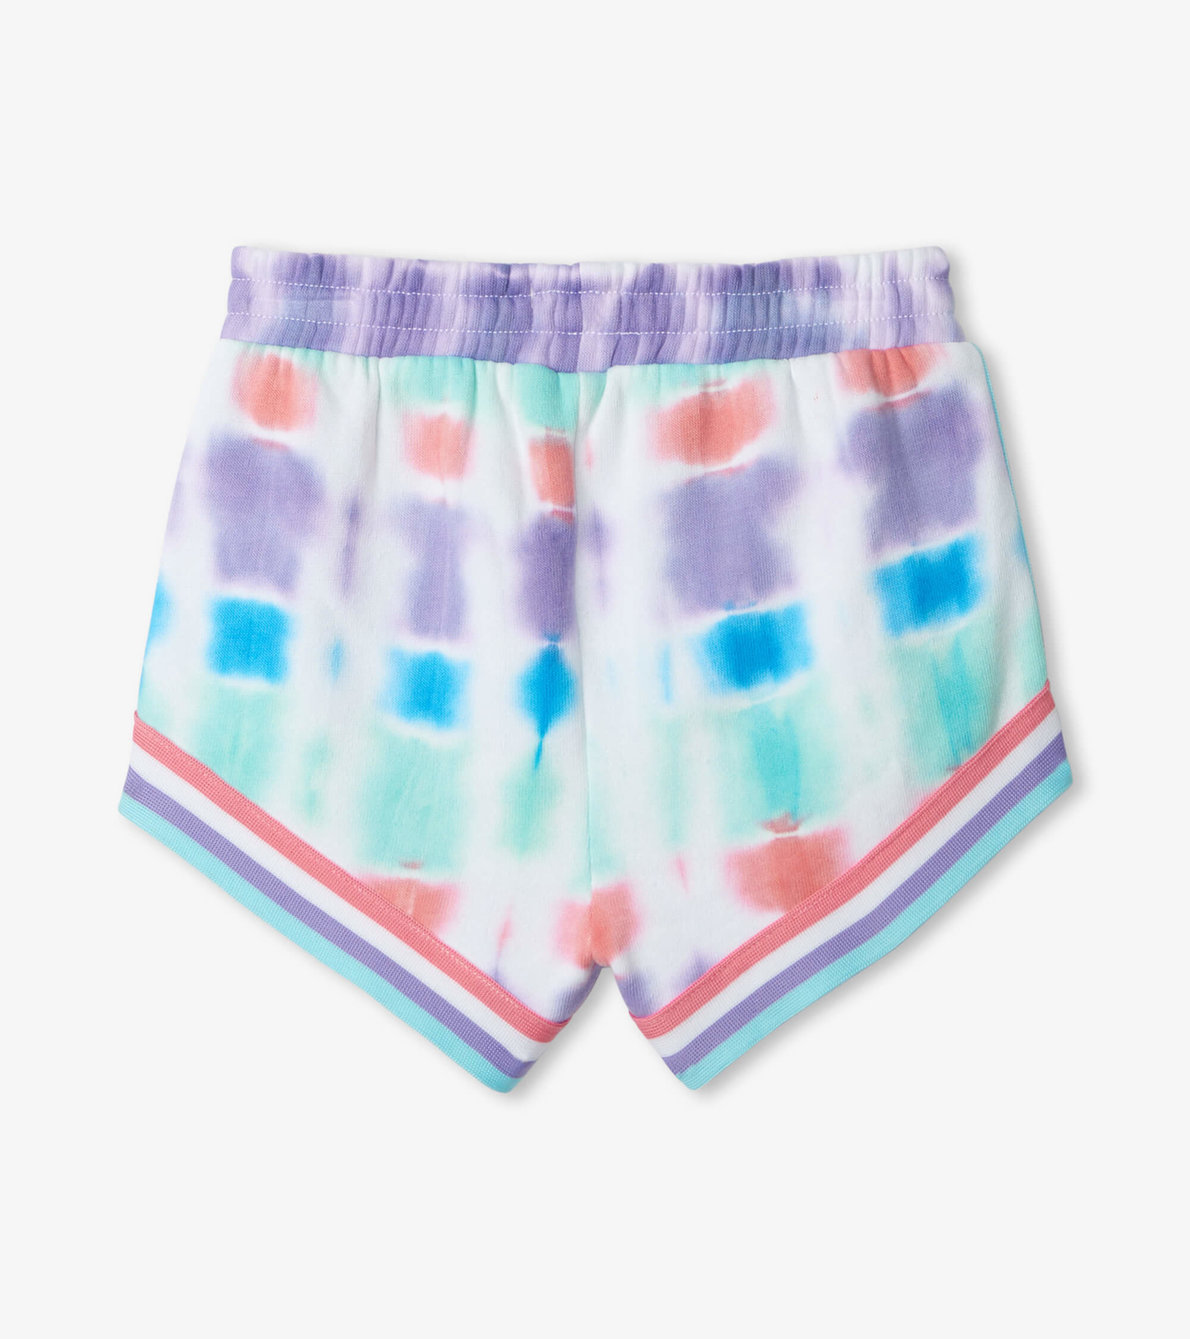 View larger image of Seaside Tie Dye French Terry Jogging Shorts